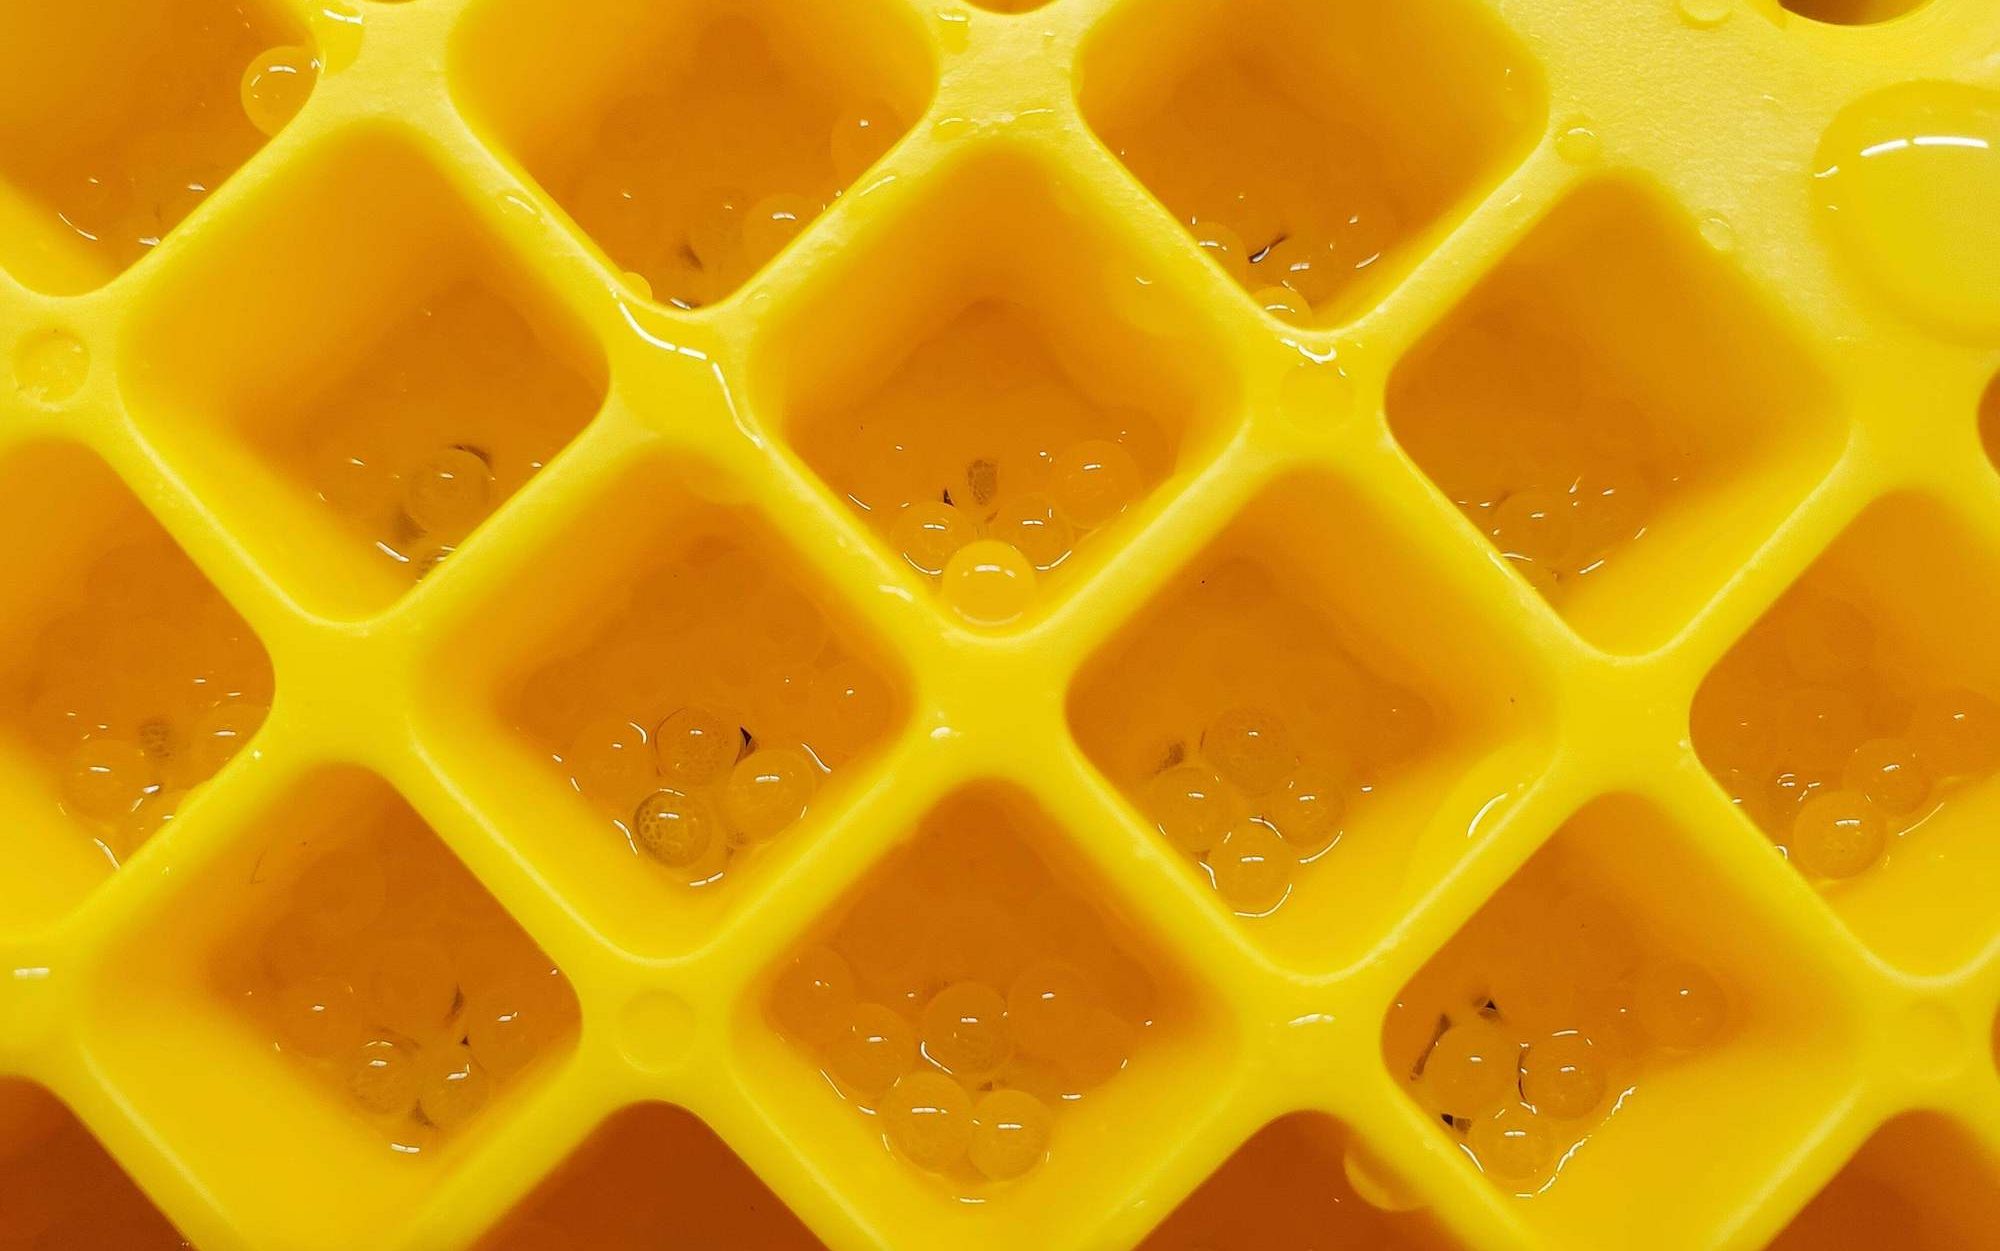 Yellow egg mat with honeycomb-like structure housing multiple small, clear fish eggs.